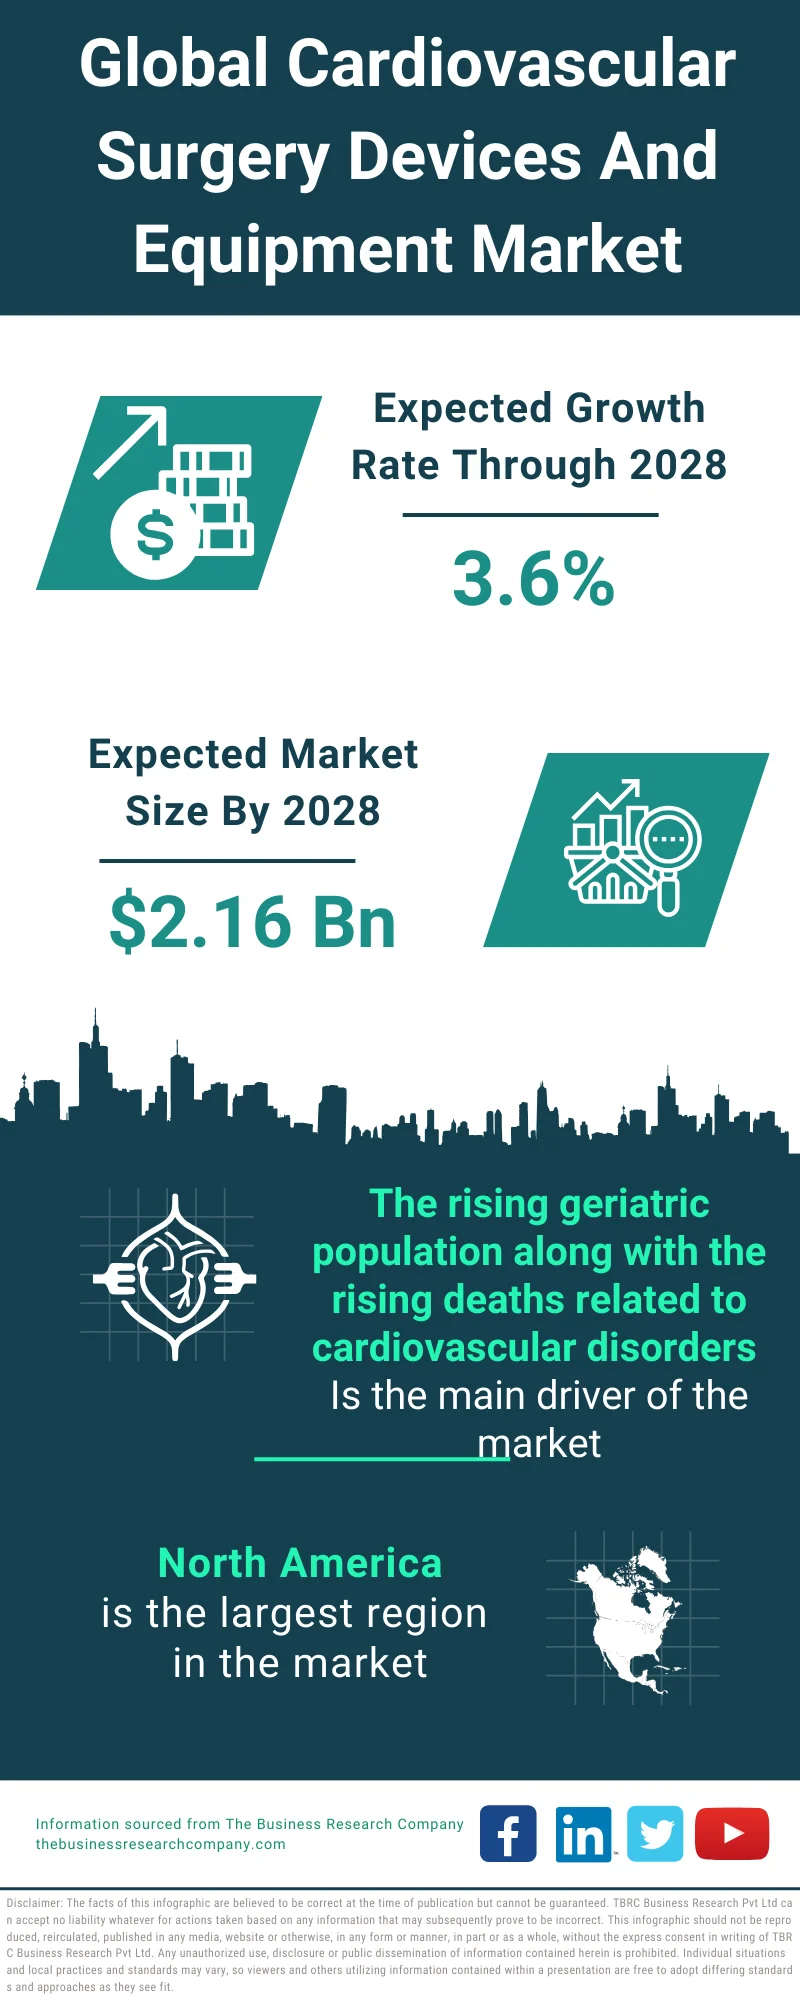 Cardiovascular Surgery Devices And Equipment Market